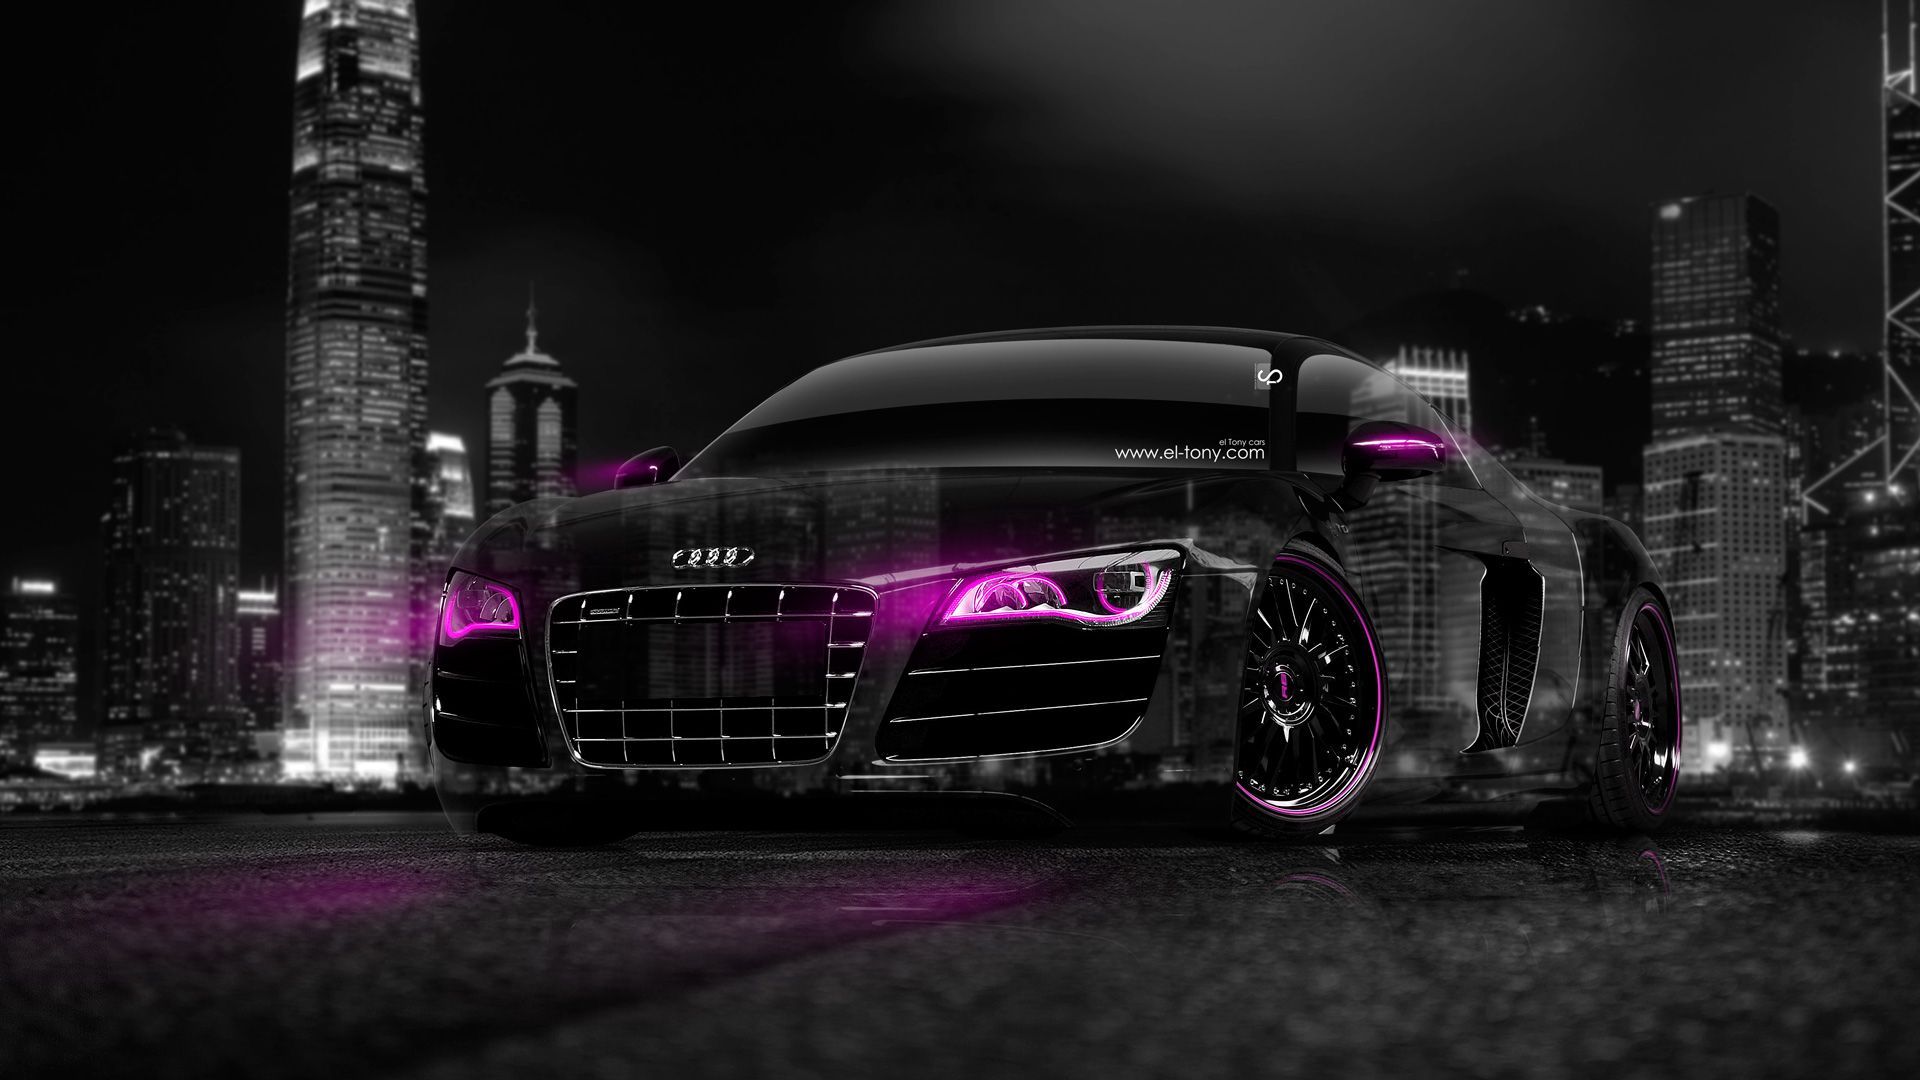 500 Audi Wallpapers HD  Download Free Images On Unsplash  Audi cars  Car headlights Car buying